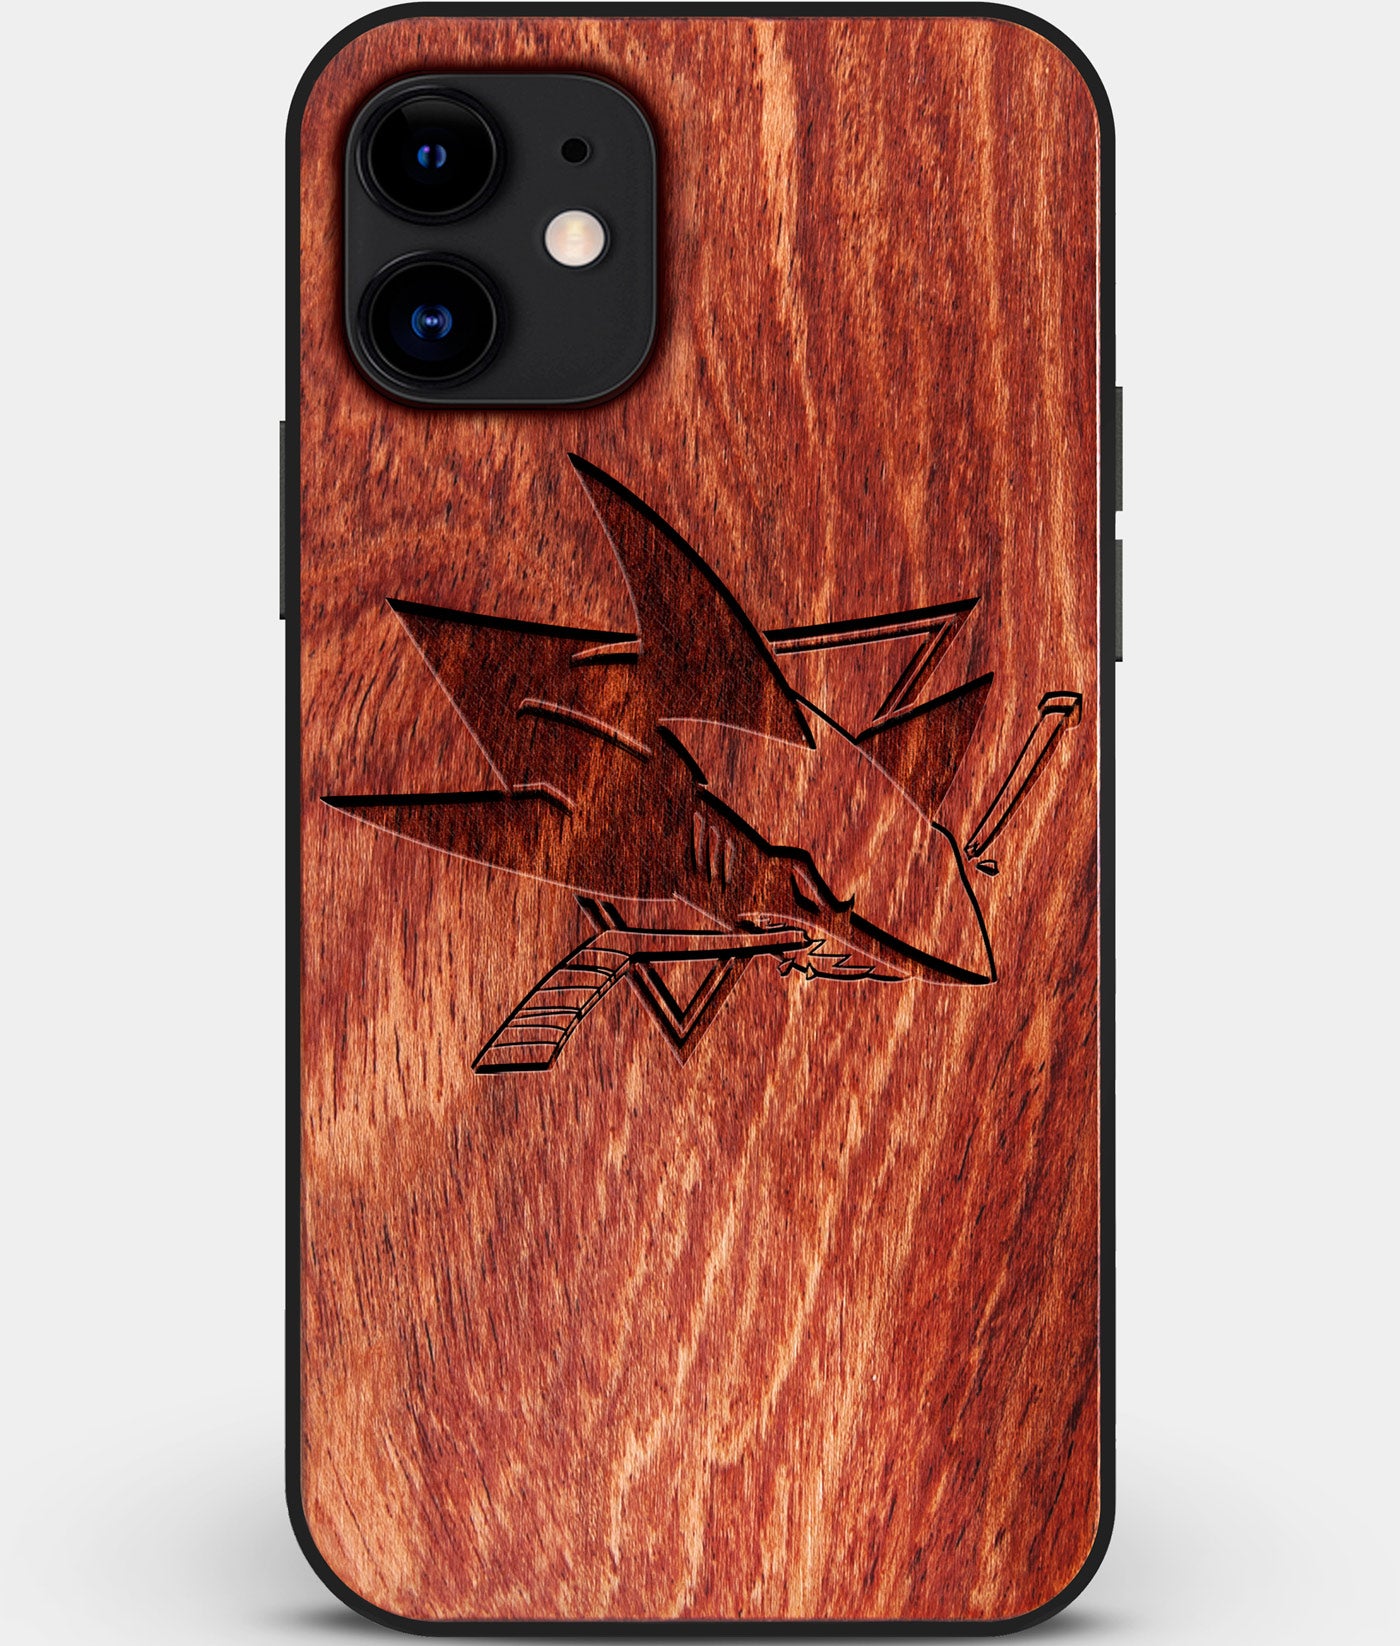 Custom Carved Wood San Jose Sharks iPhone 12 Case | Personalized Mahogany Wood San Jose Sharks Cover, Birthday Gift, Gifts For Him, Monogrammed Gift For Fan | by Engraved In Nature